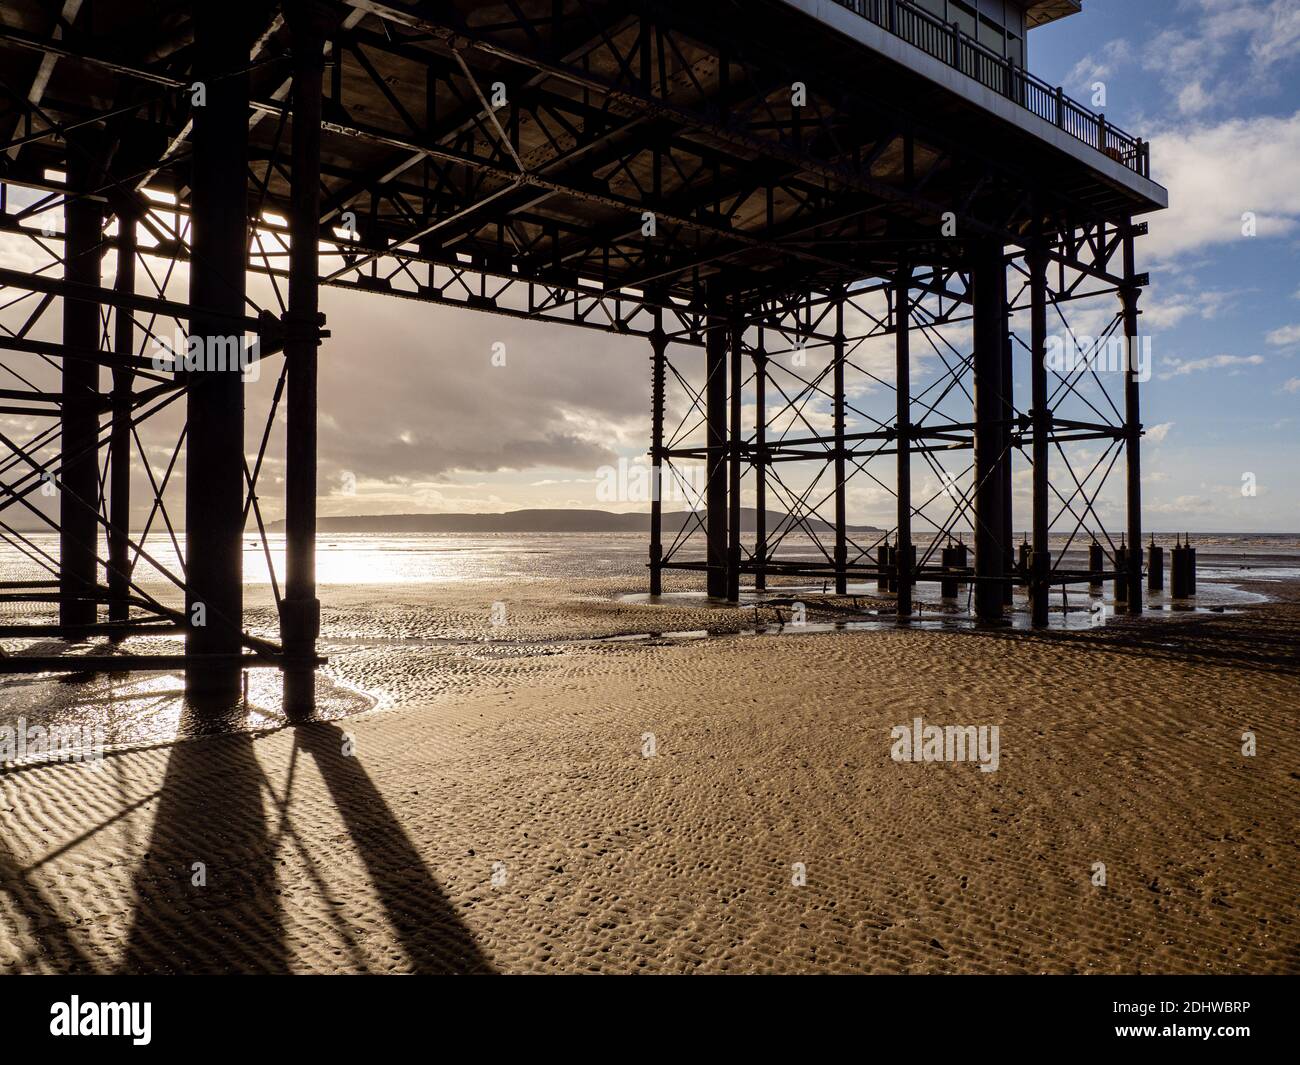 Underneath the Grand Pier at Weston super Mare looking towards Brean Down - Somerset UK Stock Photo